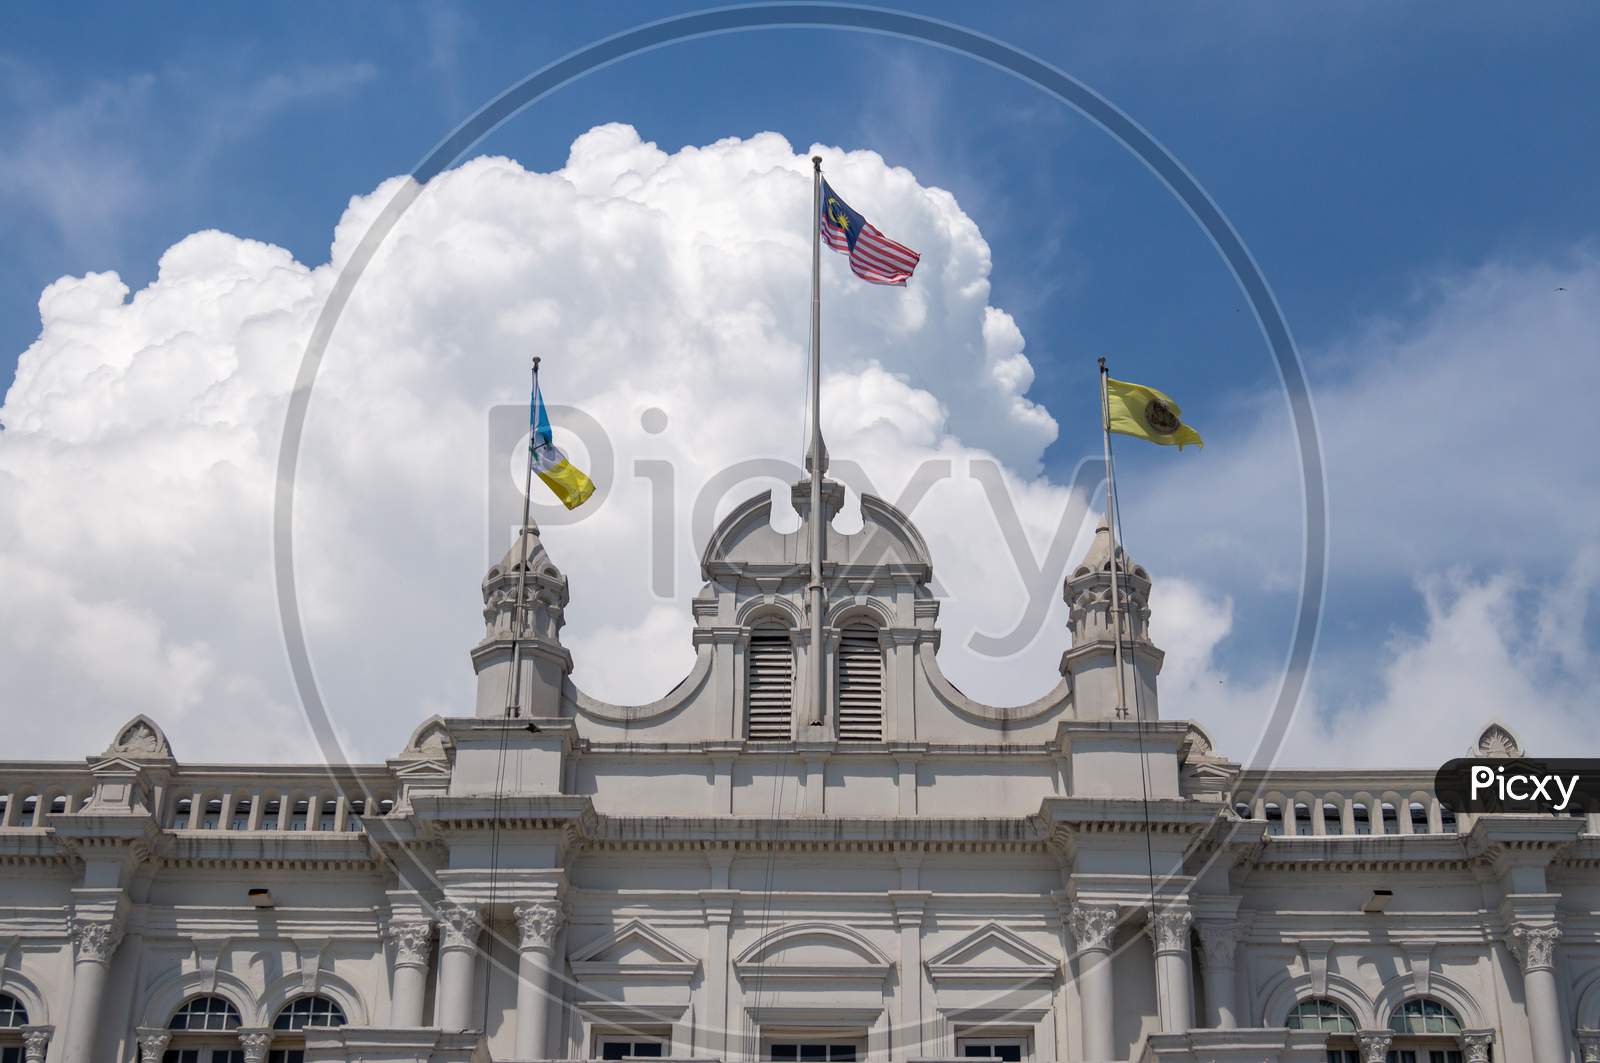 Detail Of Architecture City Hall With Malaysia And Penang Flag Waving